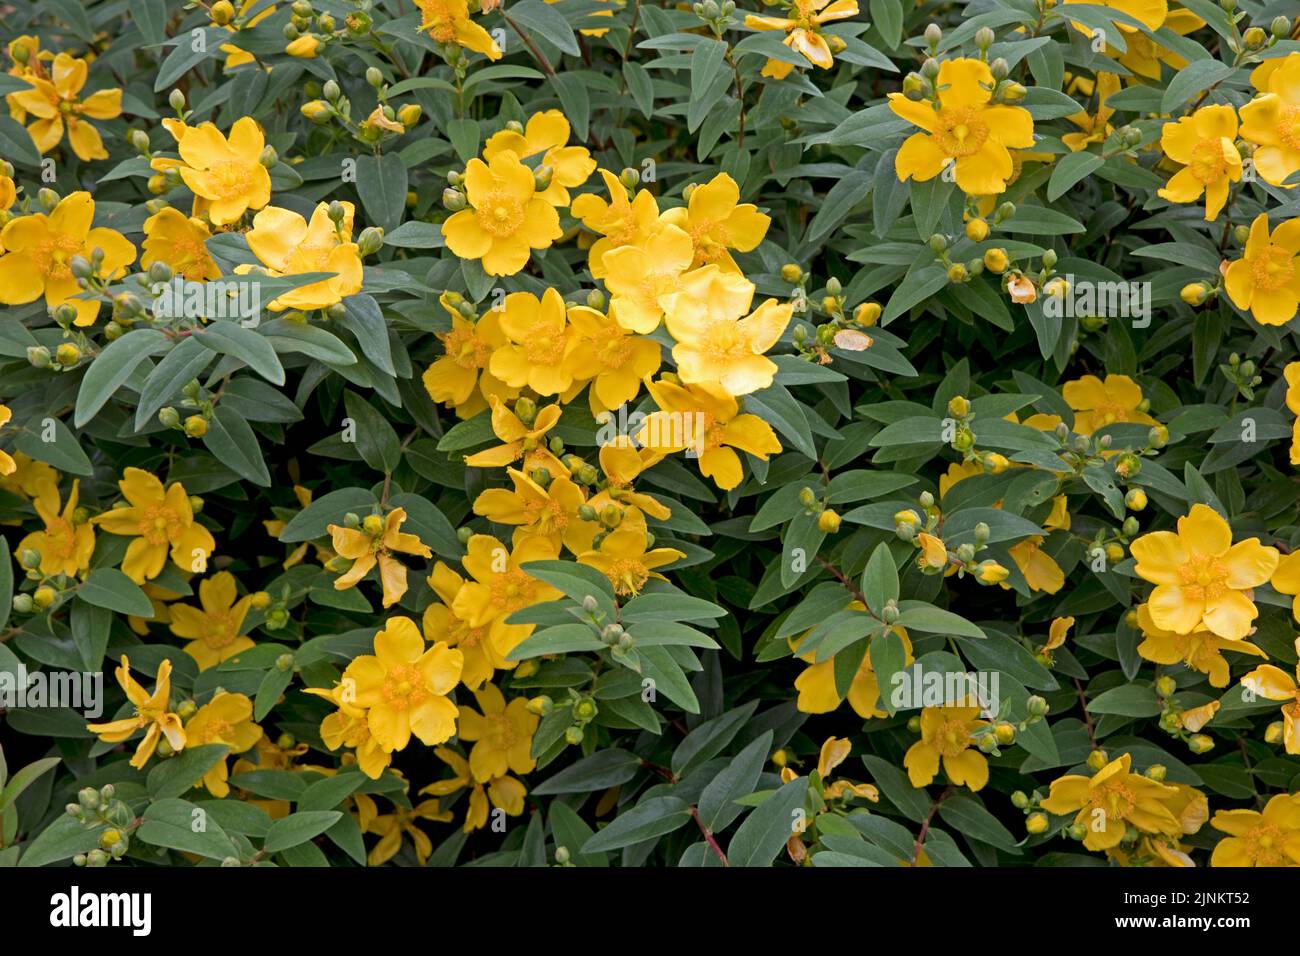 Yellow flowers of St John's Wort Hypericum perforatum is a flowering shrub native to Europe which has medical propoerties claiming to treat depression Stock Photo